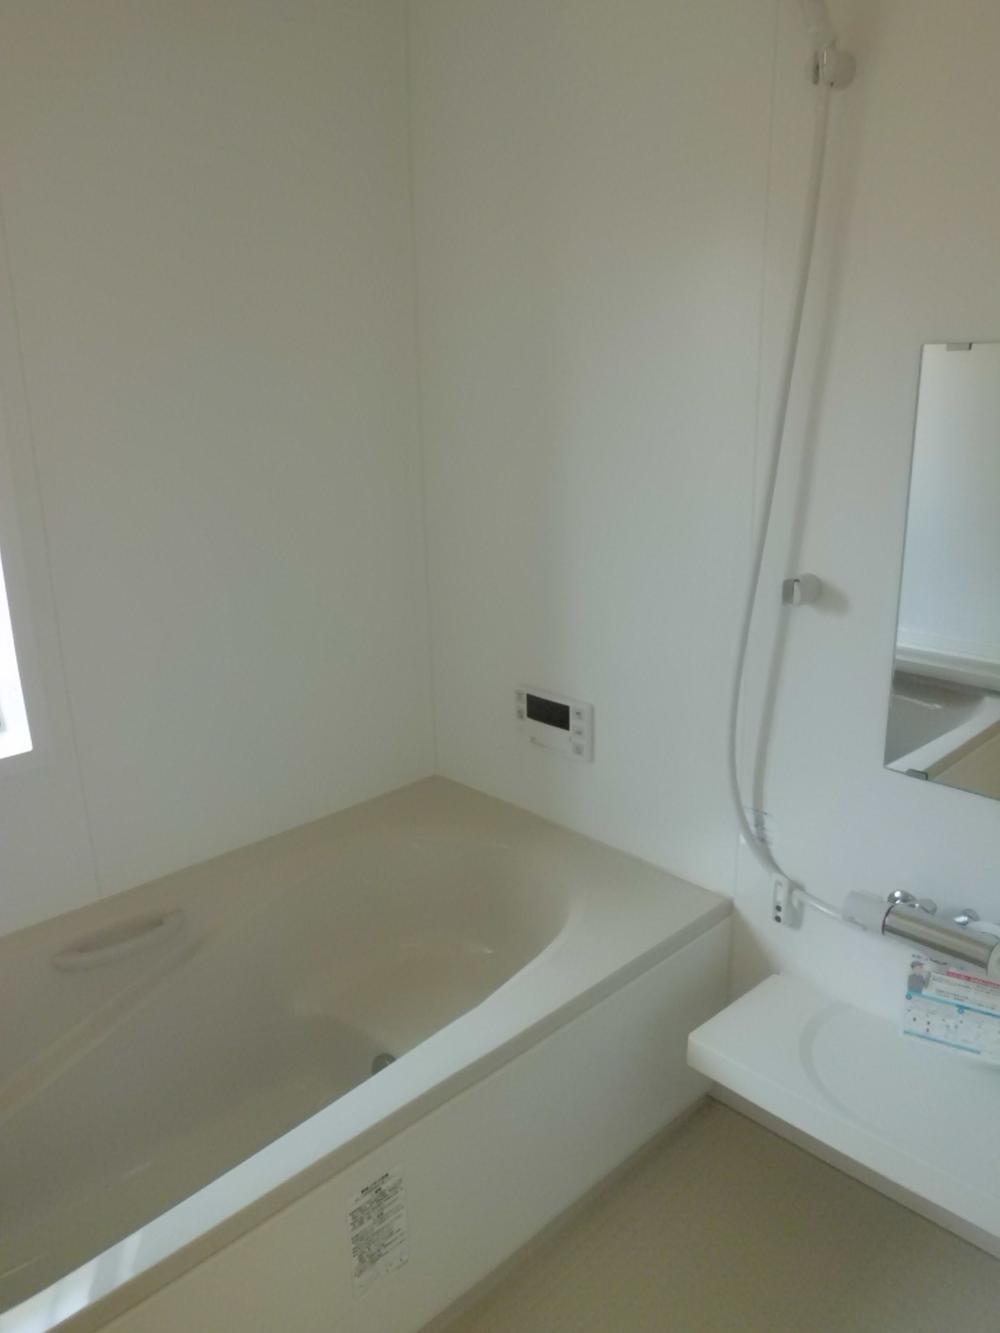 Bathroom.  [Building 2] It is functional bathtub with a bench that can sitz bath (October 2013) Shooting